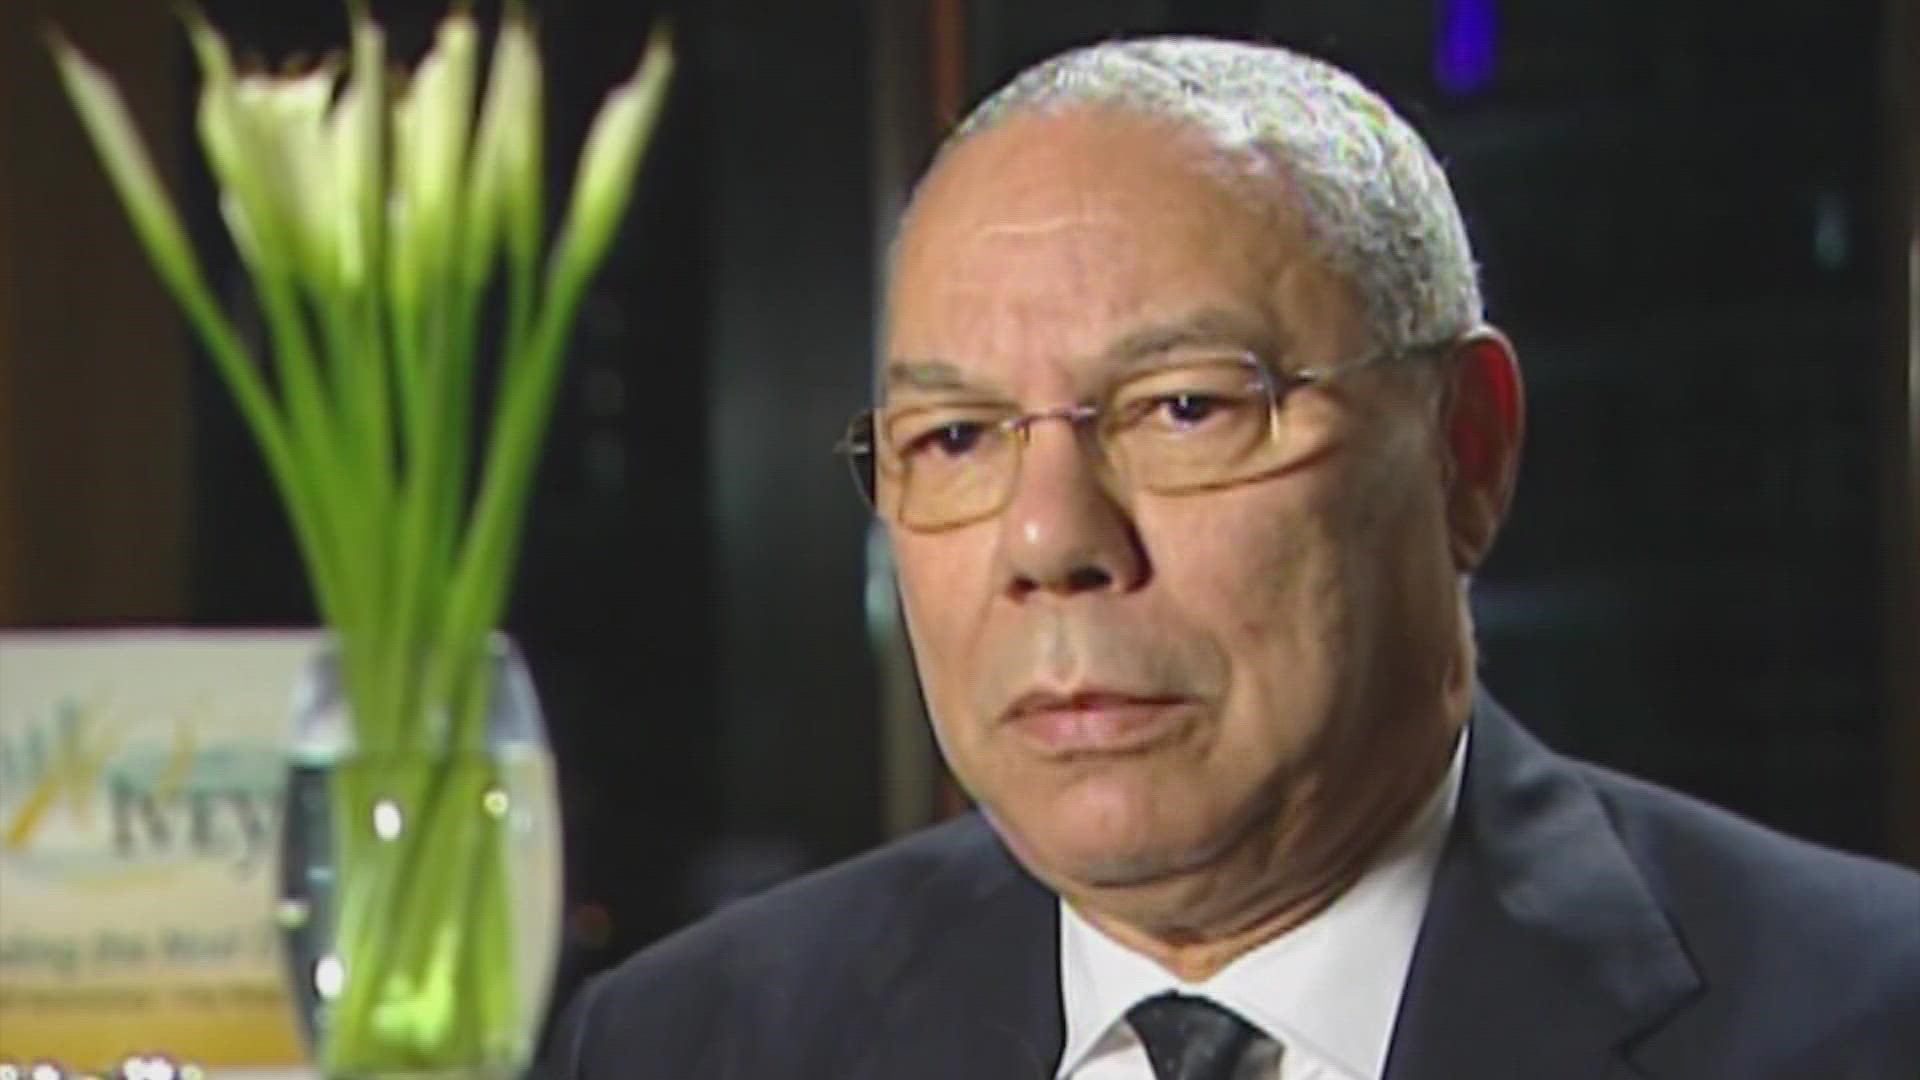 Despite getting vaccinated against COVID-19, Colin Powell remained vulnerable to the virus because of his advanced age and history of cancer.